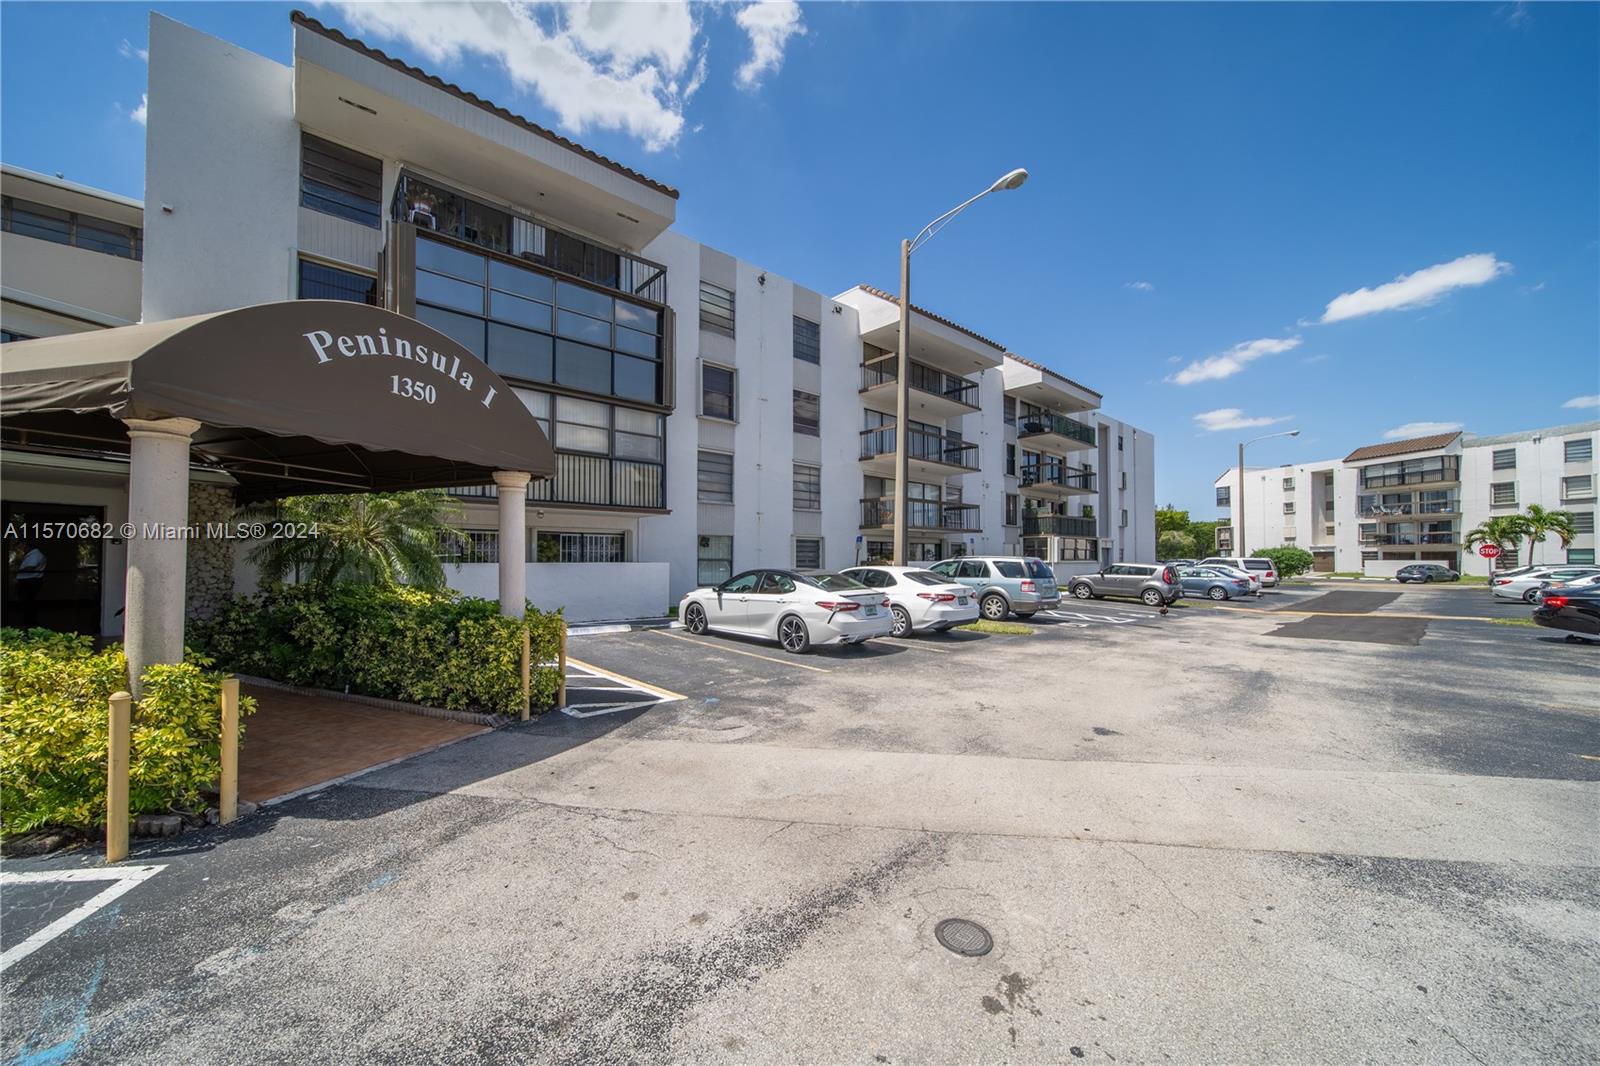 1350 SW 122nd Ave 306, Miami, Florida 33184, 2 Bedrooms Bedrooms, ,2 BathroomsBathrooms,Residential,For Sale,1350 SW 122nd Ave 306,A11570682